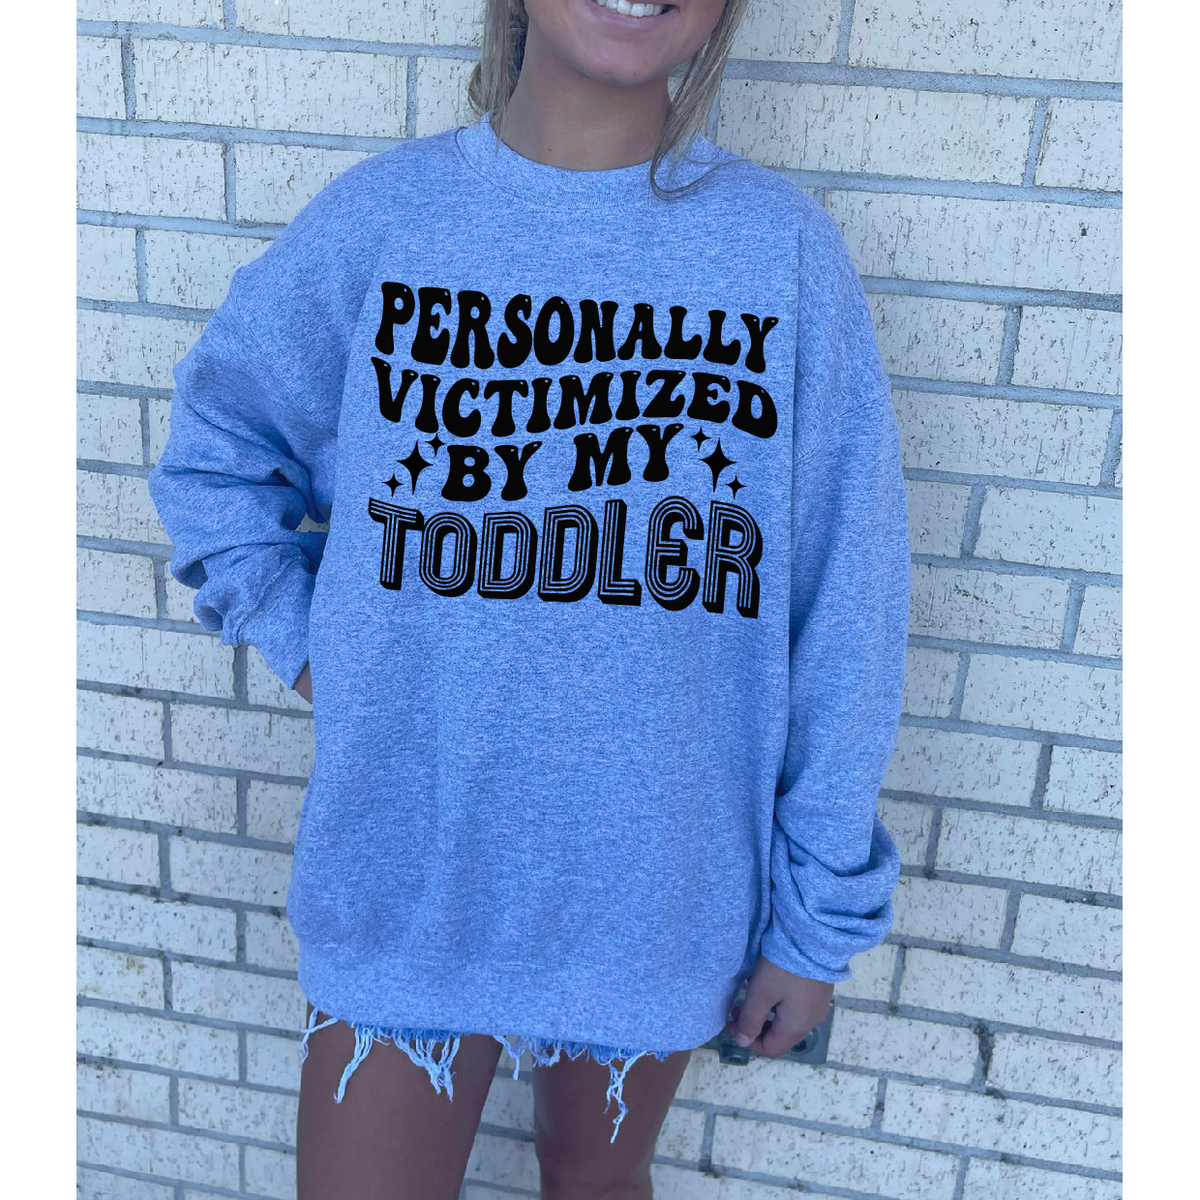 Personally Victimized by my Toddler tee or Sweatshirt